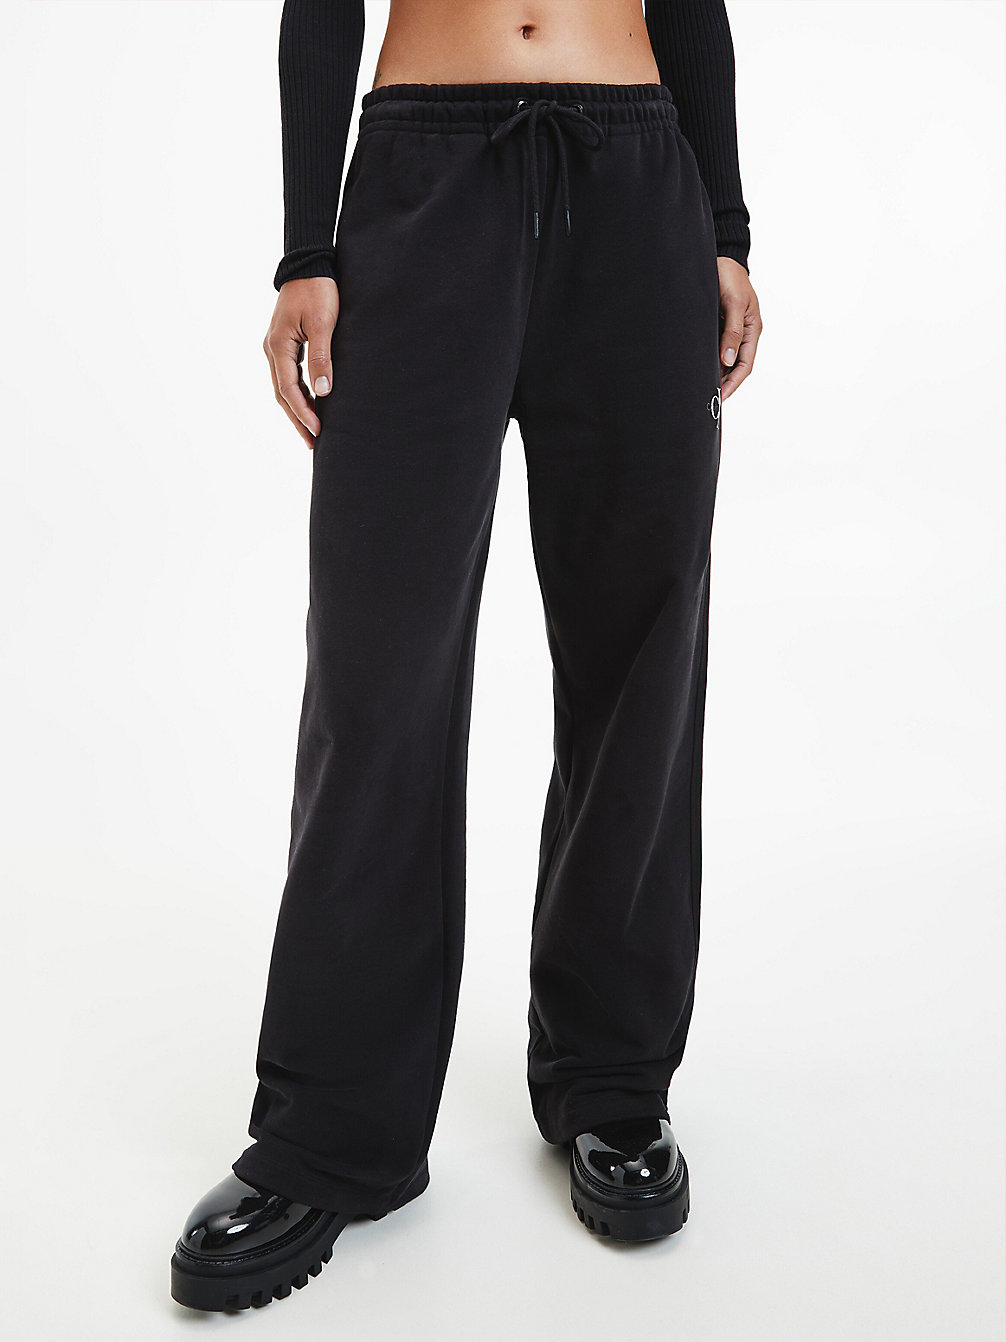 CK BLACK Relaxed Straight Joggers undefined women Calvin Klein